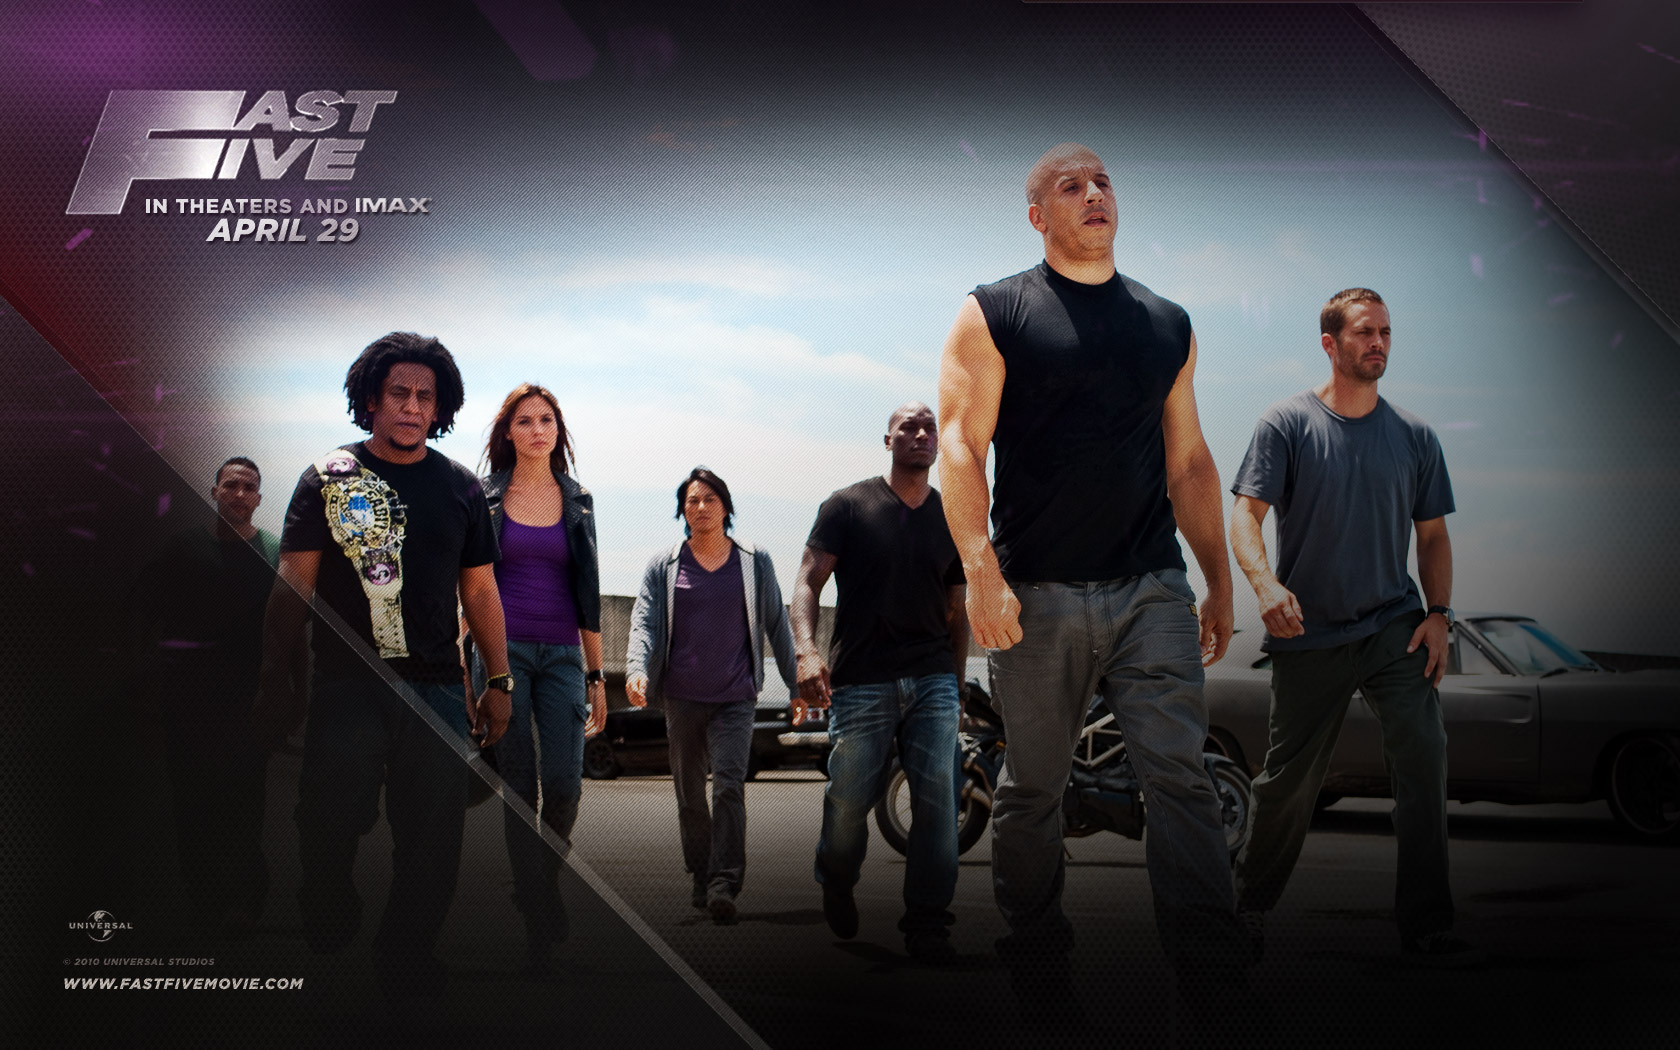 Fast Five Wallpapers 1680x1050   Movie Wallpapers